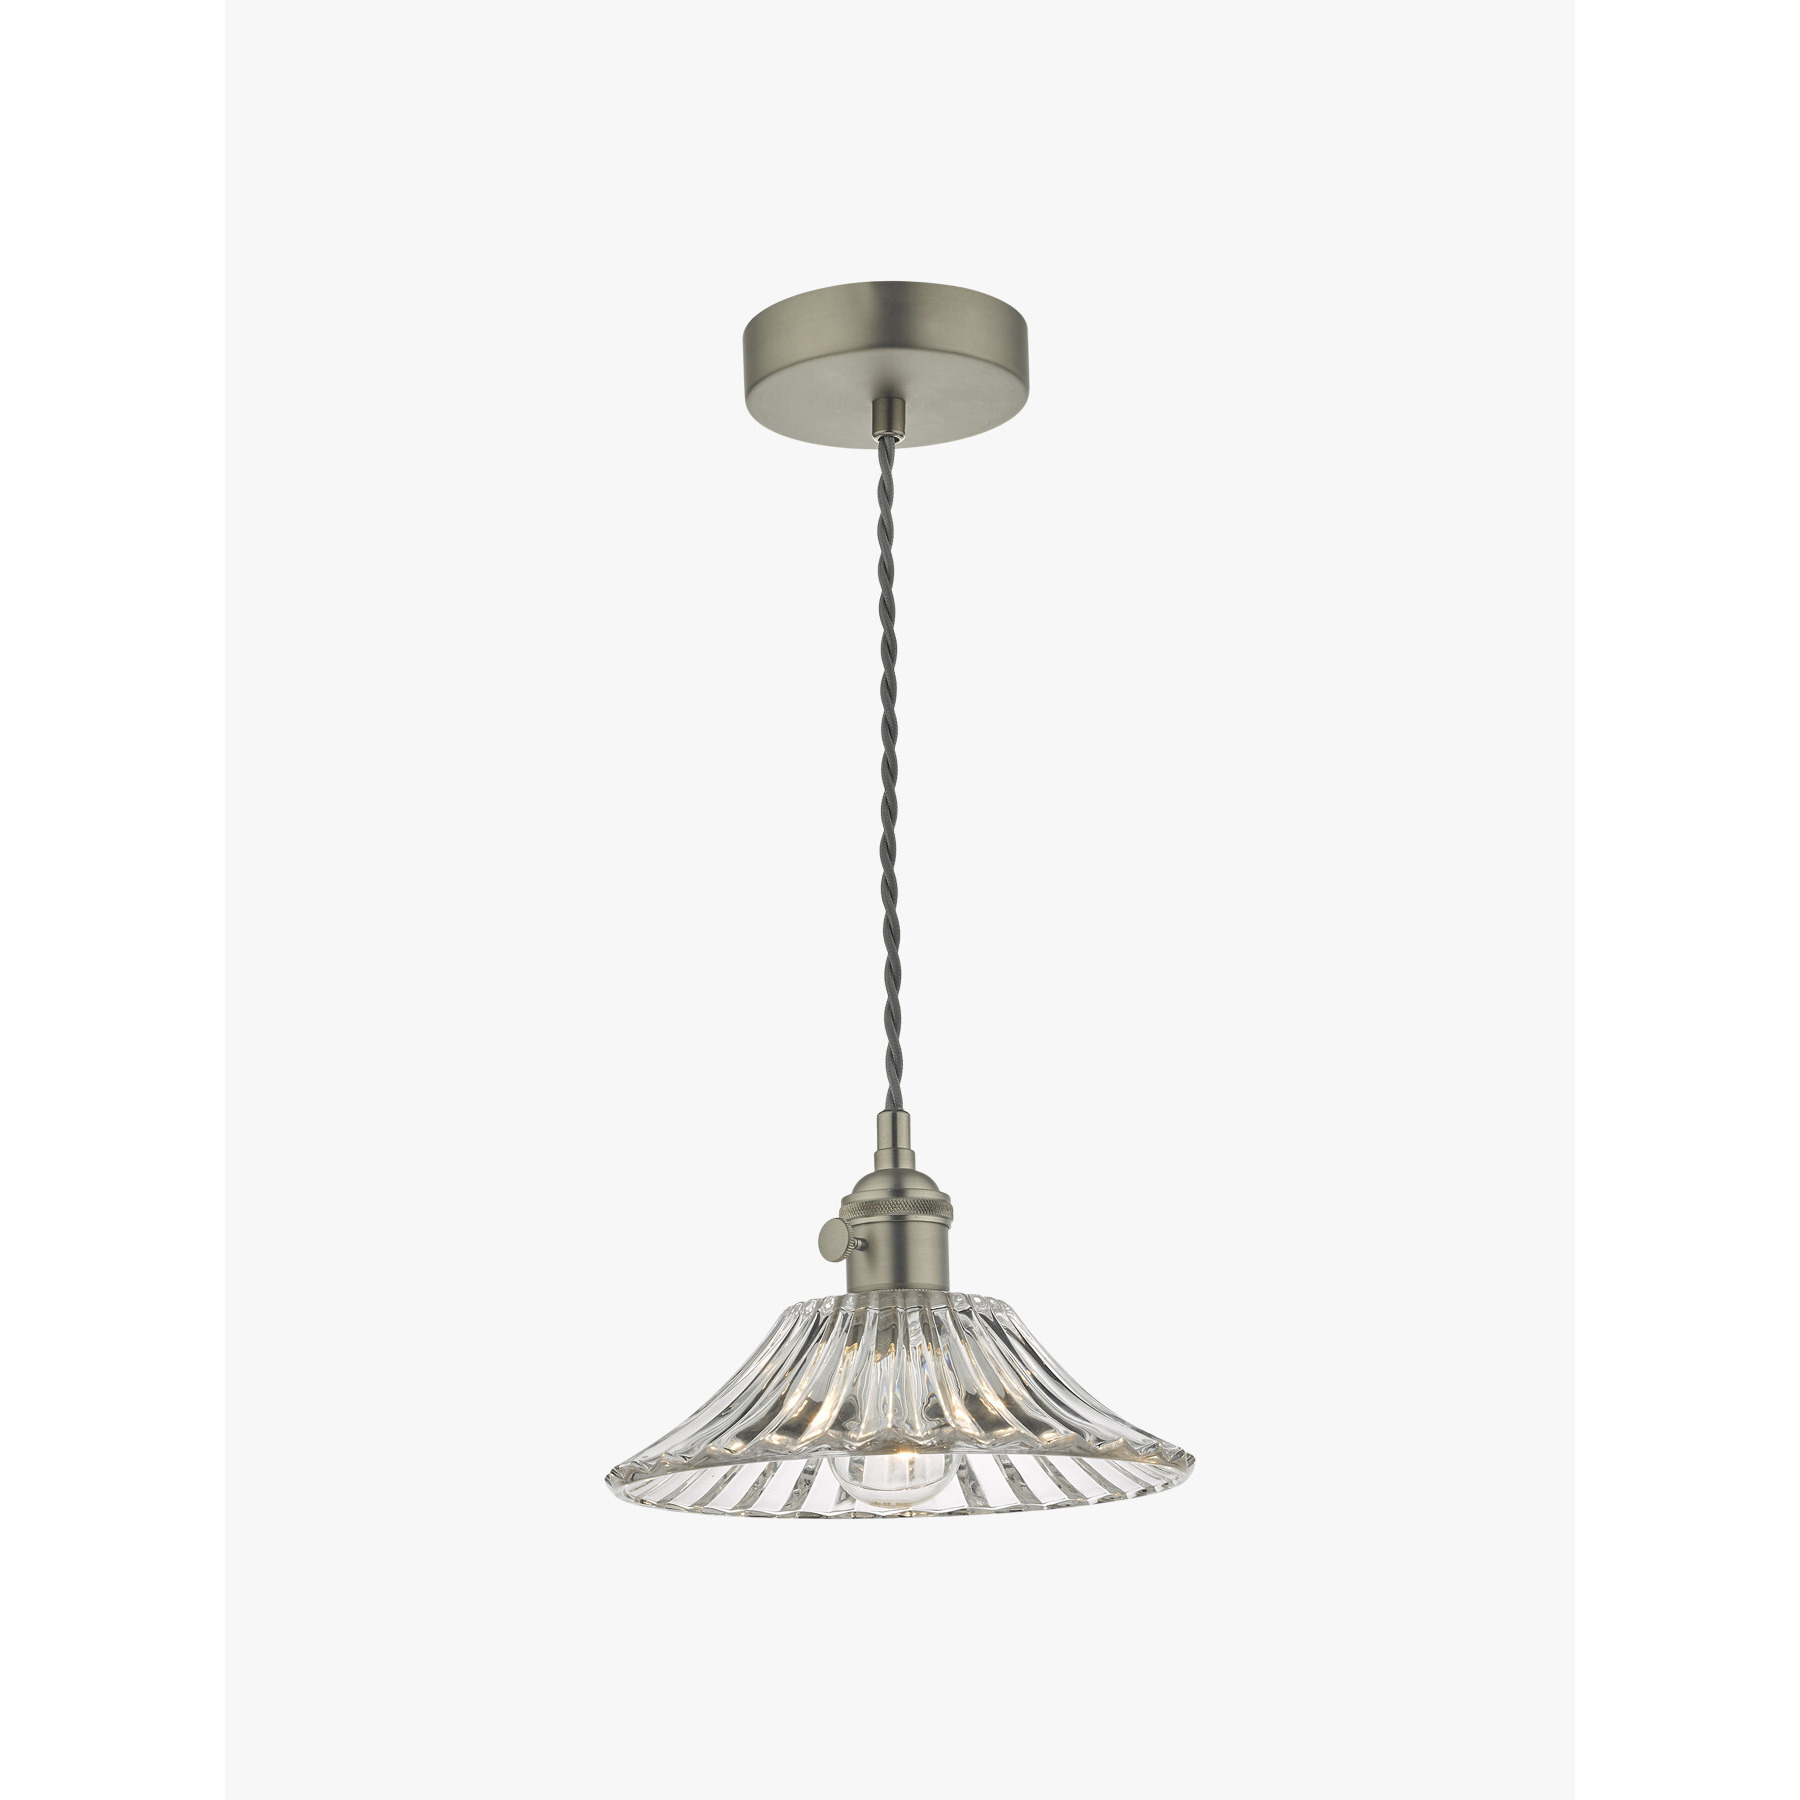 Dar Lighting Hadano Pendant -  Antique Chrome with Flared Glass Shade Silver - image 1